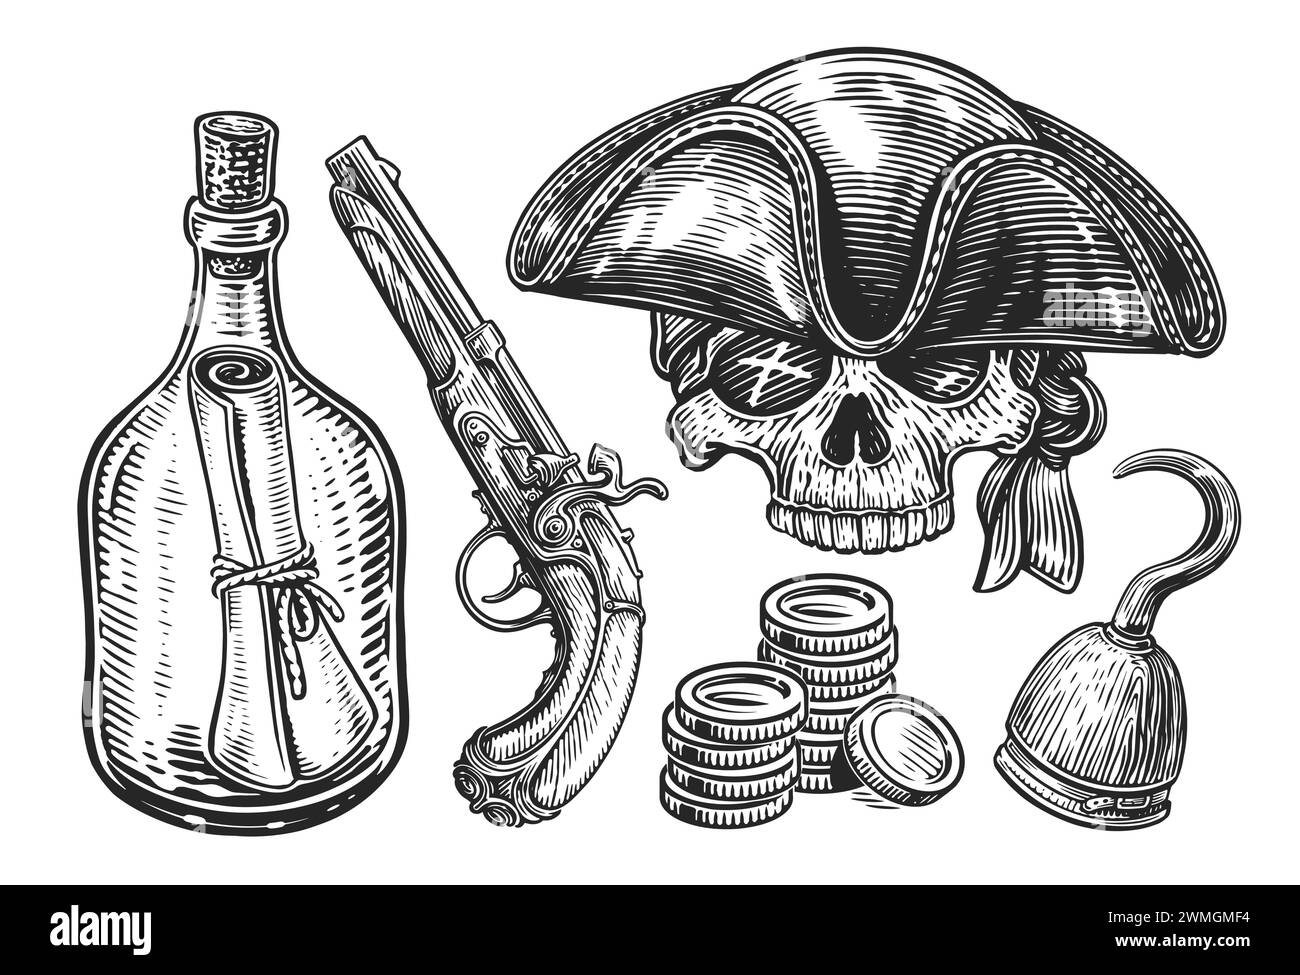 https://c8.alamy.com/comp/2WMGMF4/hand-drawn-pirate-concept-sketch-vintage-vector-illustration-items-collection-2WMGMF4.jpg